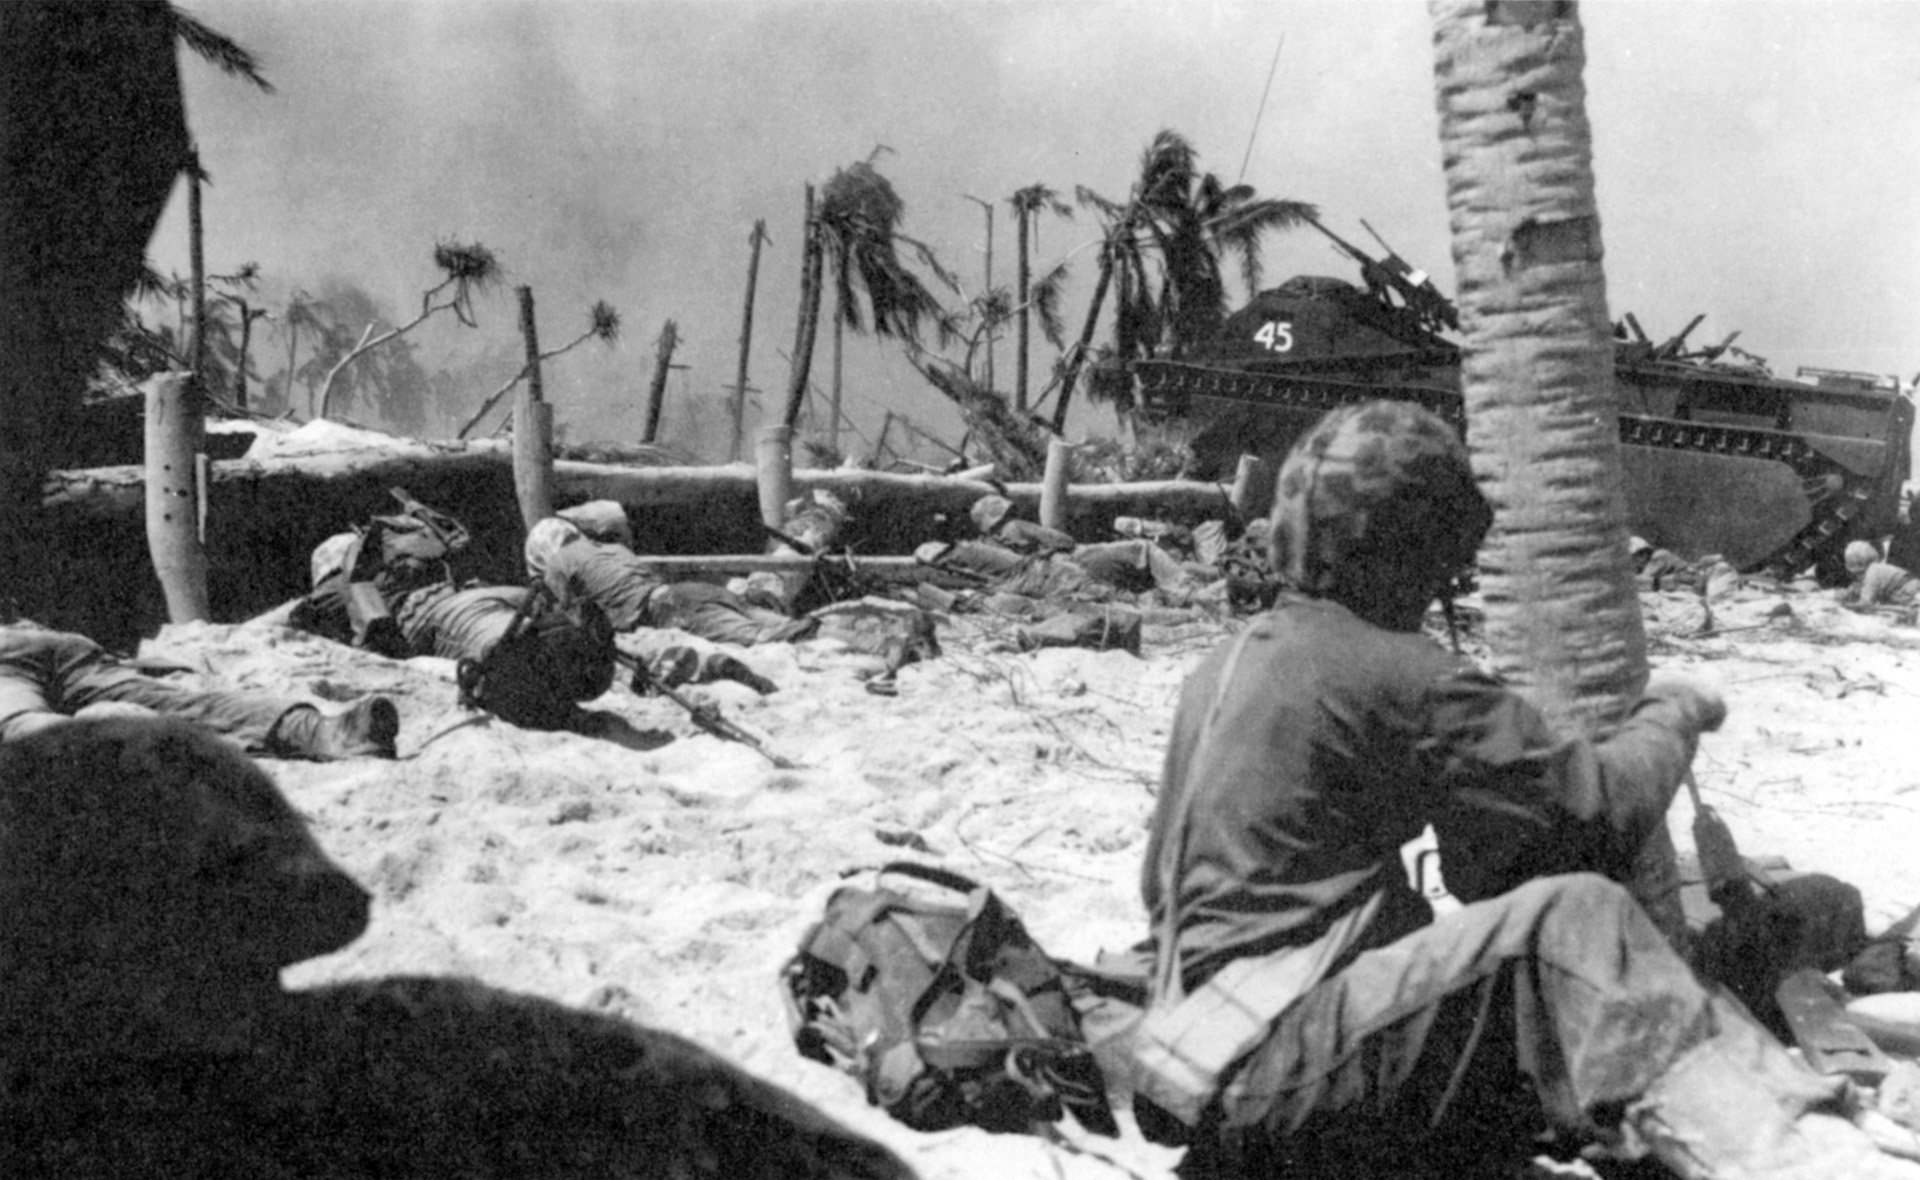  The Japanese defenders of Tarawa had constructed a labyrinth of pillboxes, blockhouses, and machine gun nests with interlocking fire. Here, moments after landing, members of E Company, 8th Marines find themselves under withering fire.